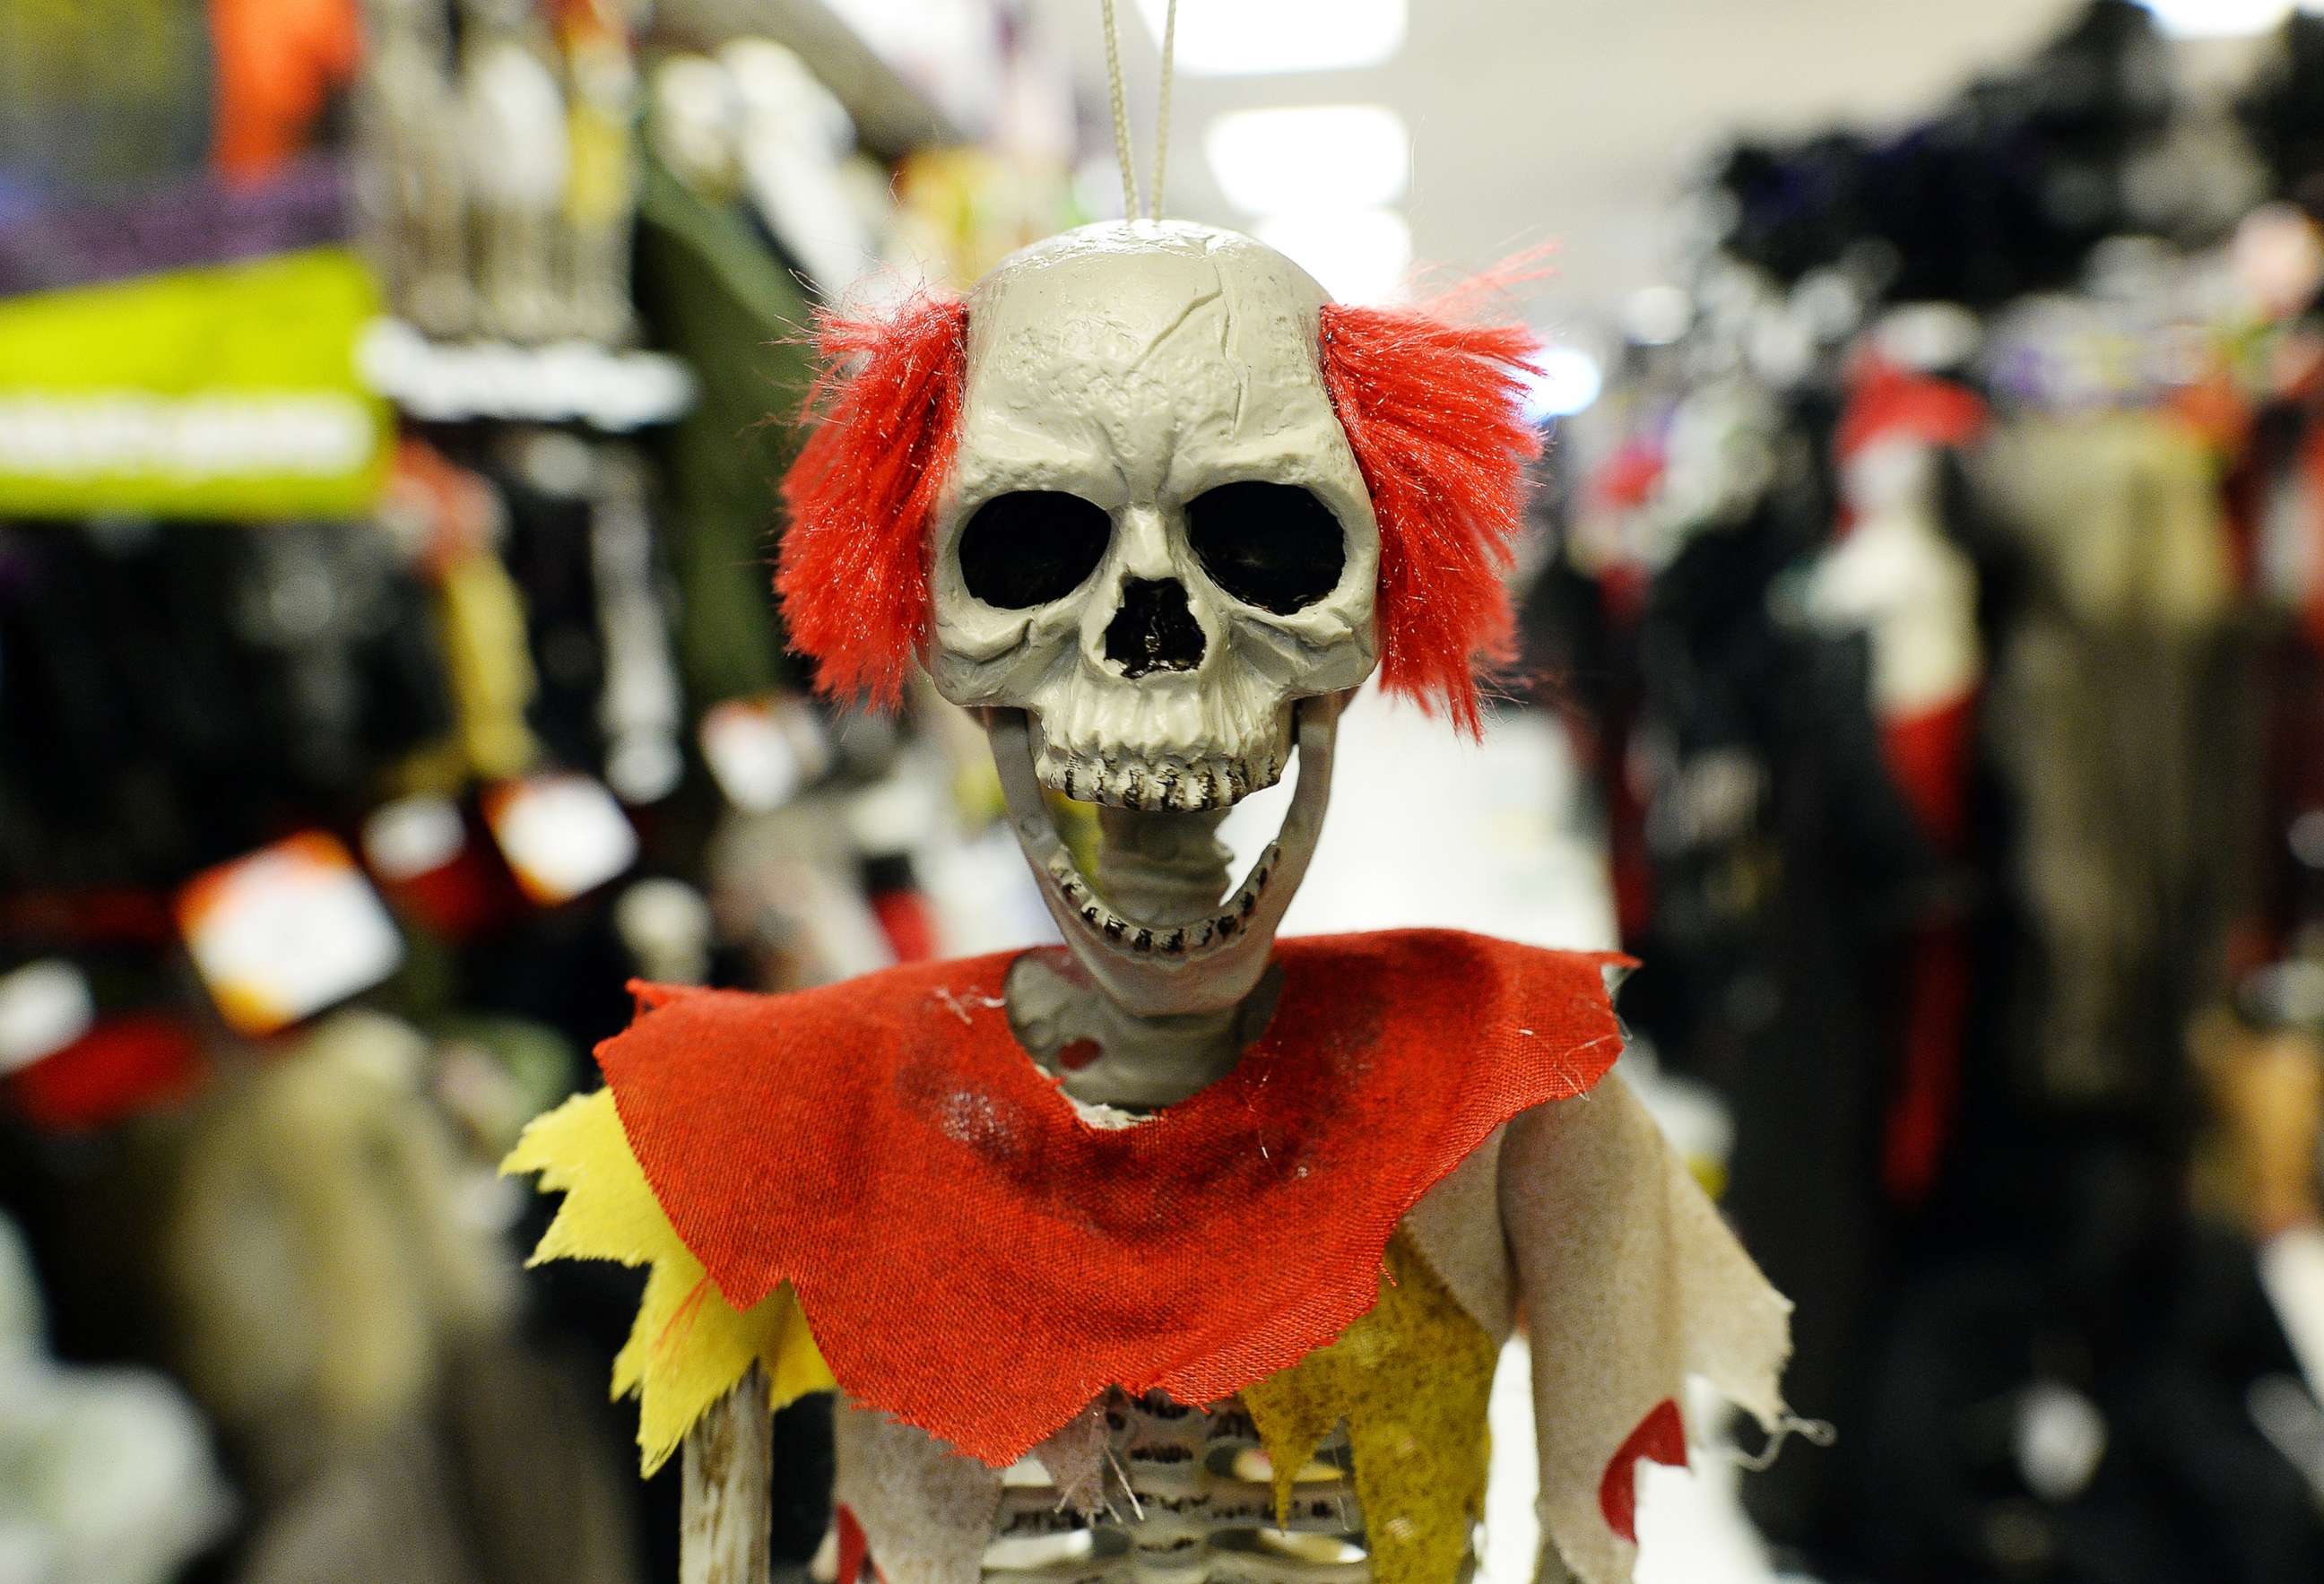 PHOTO: Halloween decorations are displayed at a store in Rockville, Md., Oct. 22, 2013.